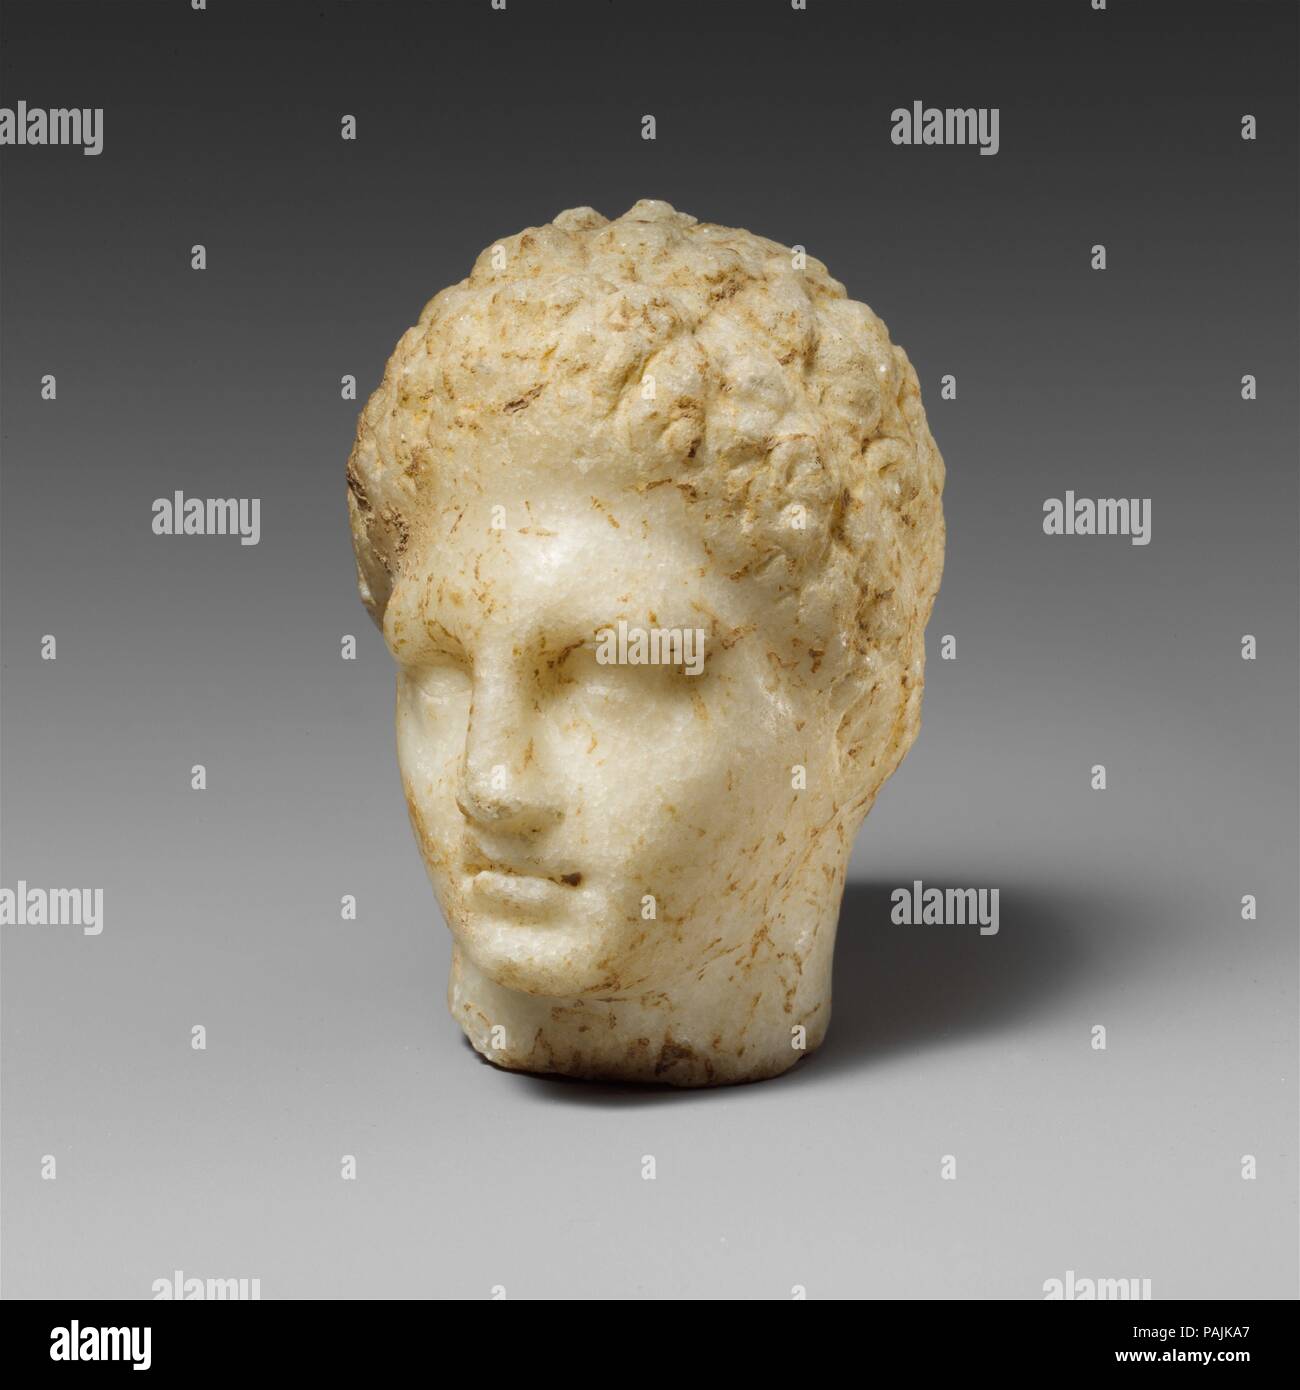 Marble head of a youth. Culture: Greek. Dimensions: H. 2 1/4 in. (5.7 cm.)  width 1 7/8 in. (4.8 cm.)  depth 2 in. (5.1 cm). Date: 4th century B.C..  Small marble head In the style of Praxiteles. Museum: Metropolitan Museum of Art, New York, USA. Stock Photo